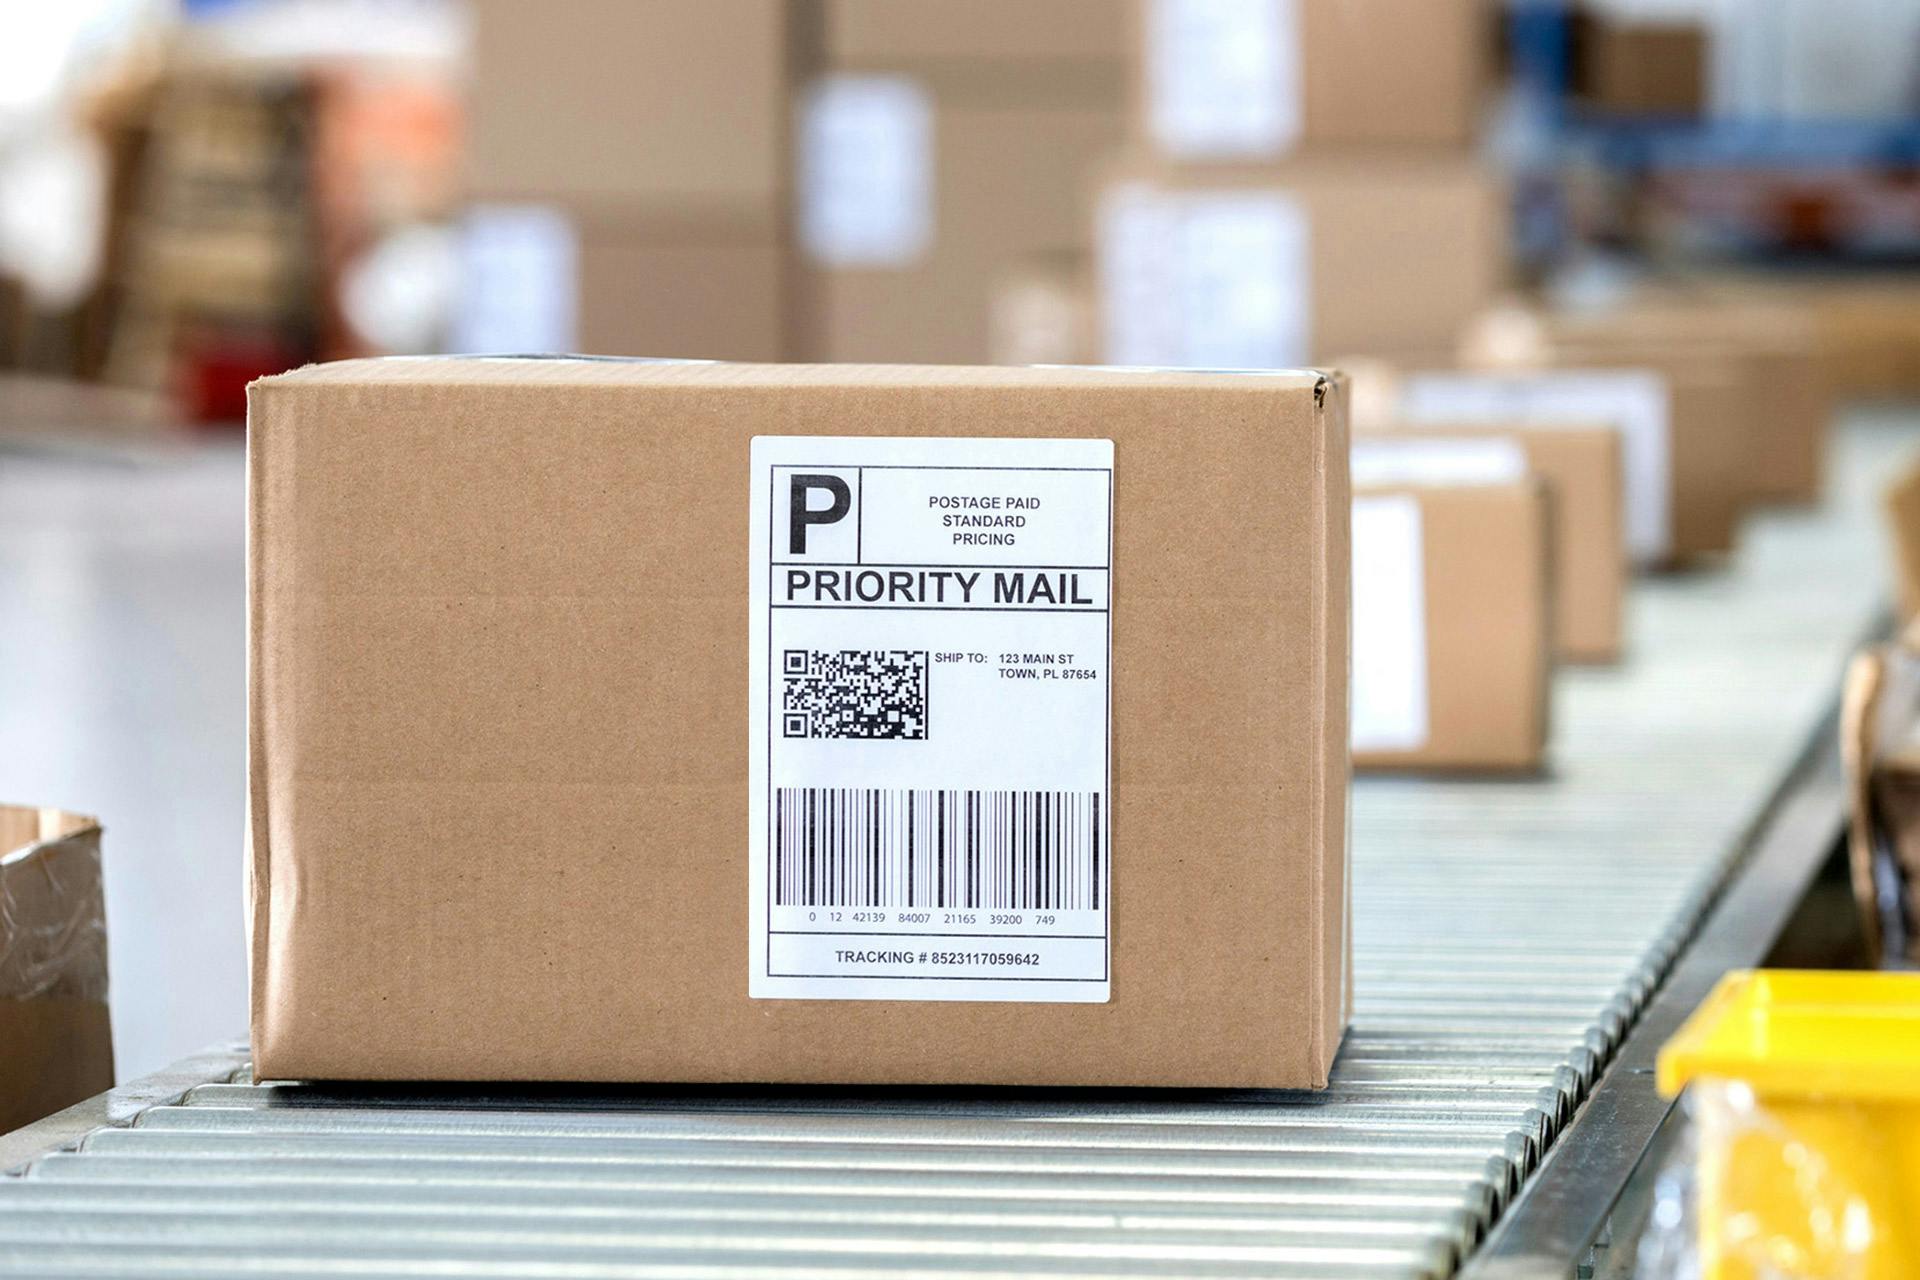 Automated data capture of consignments: A parcel with an address label on a conveyor belt.